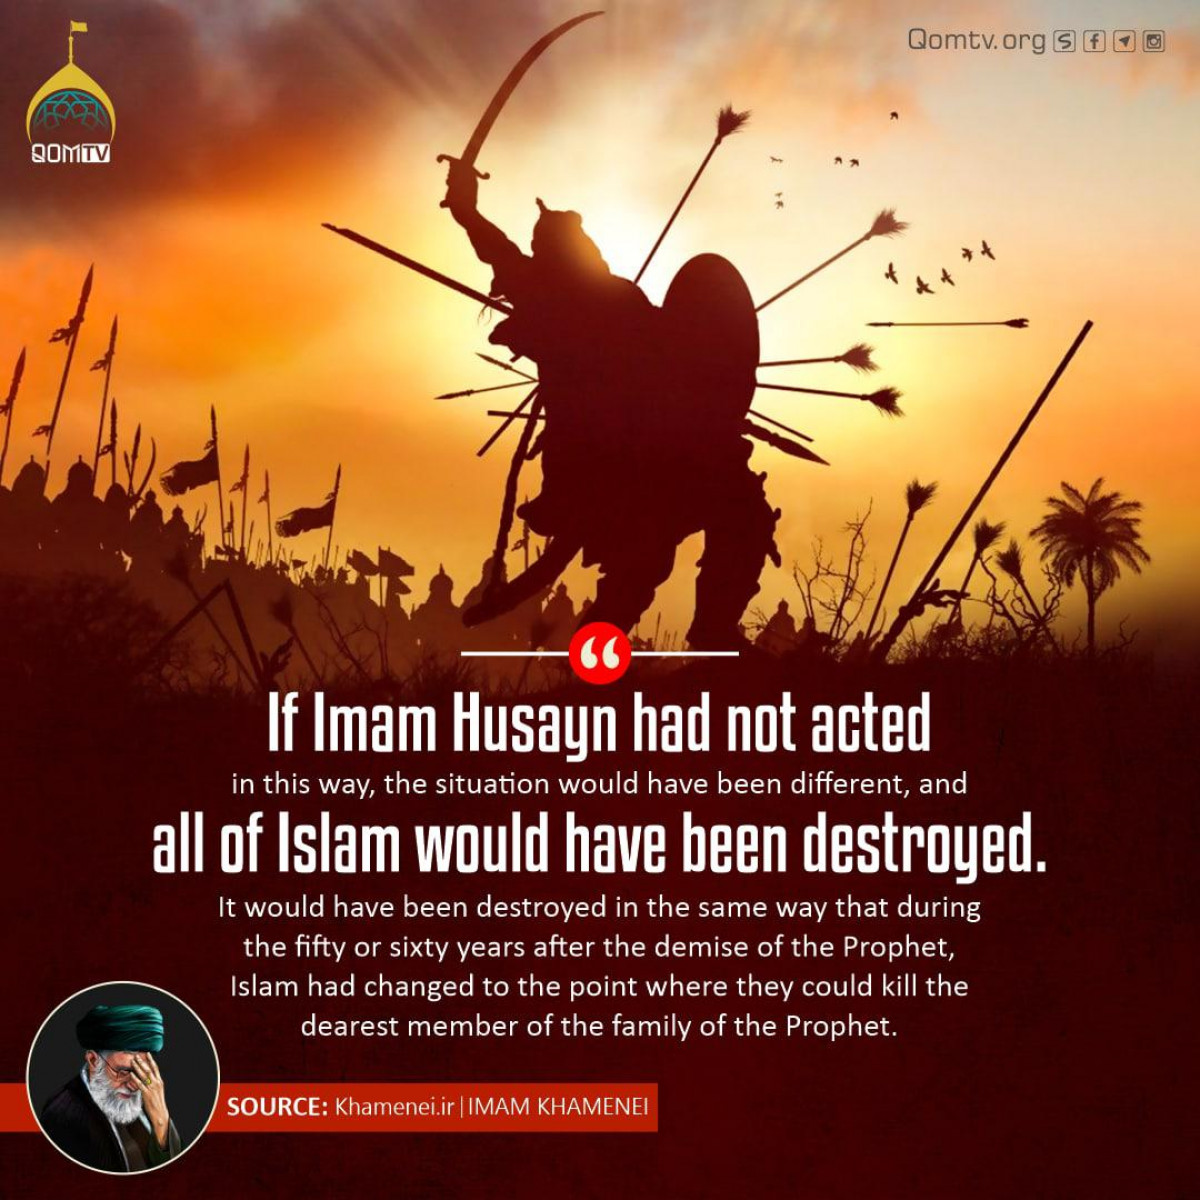 If Imam Husayn had not acted in this way!